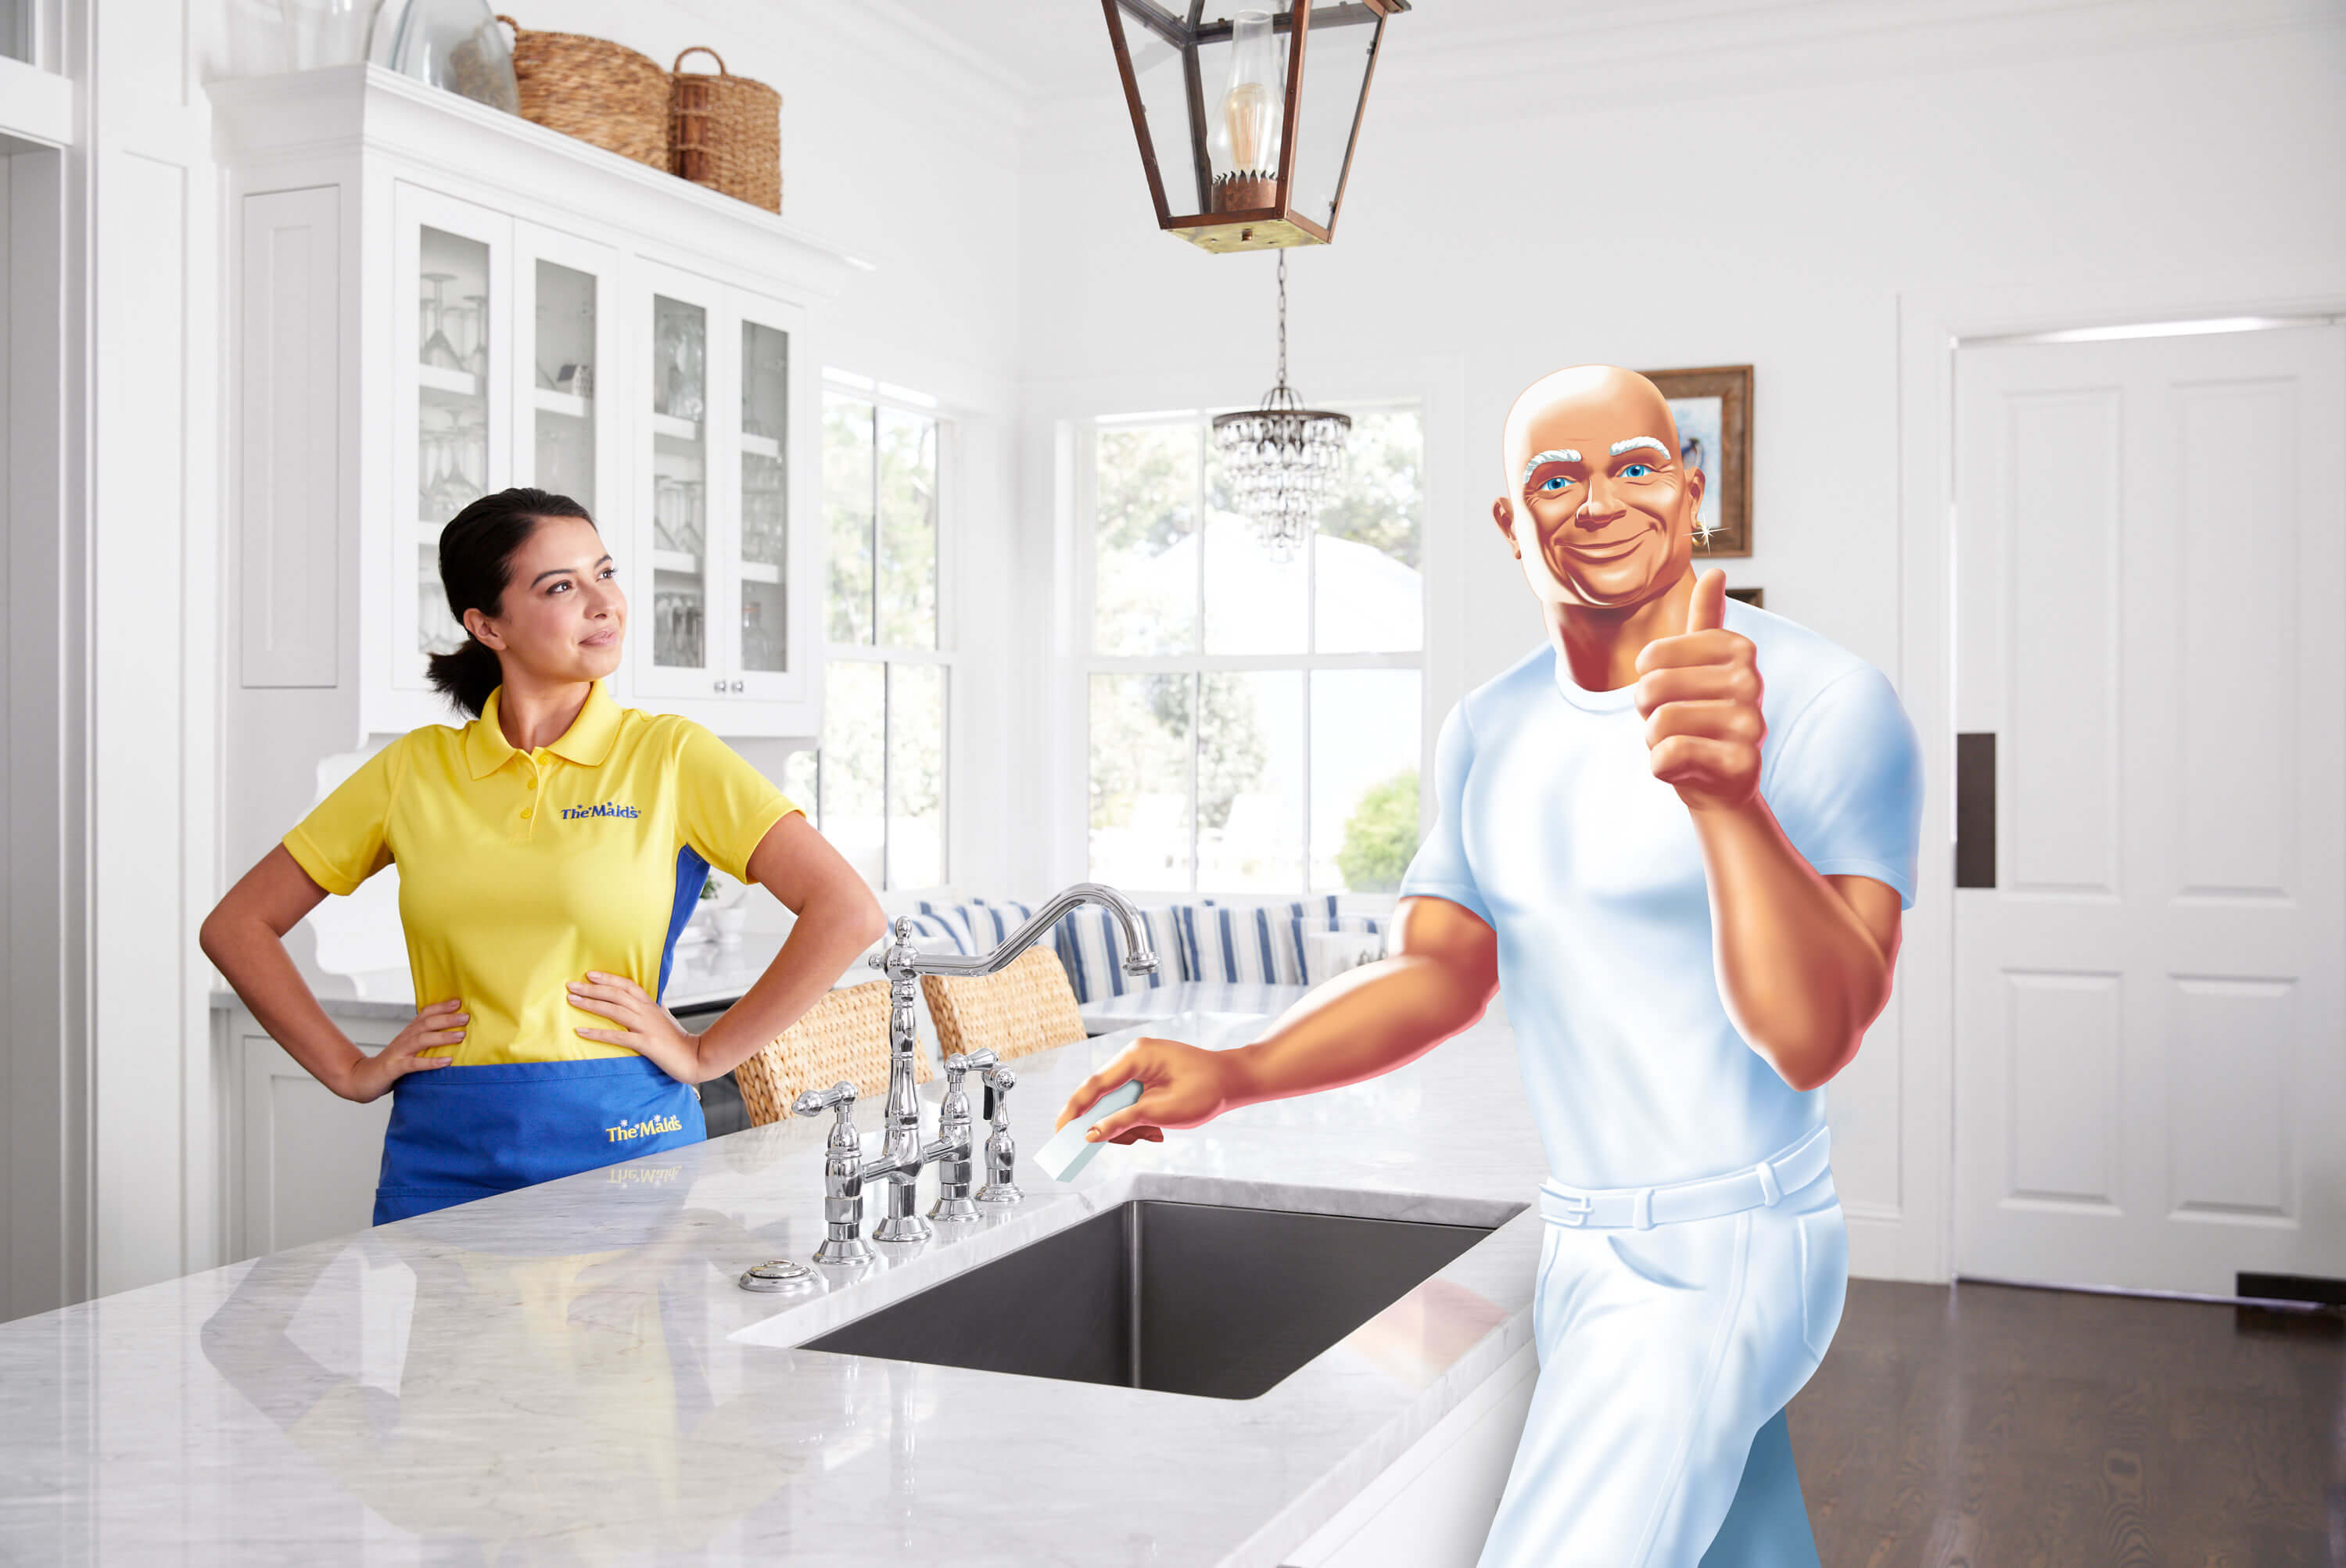 every touchpoint in this campaign featured an illustrated Mr. Clean working...